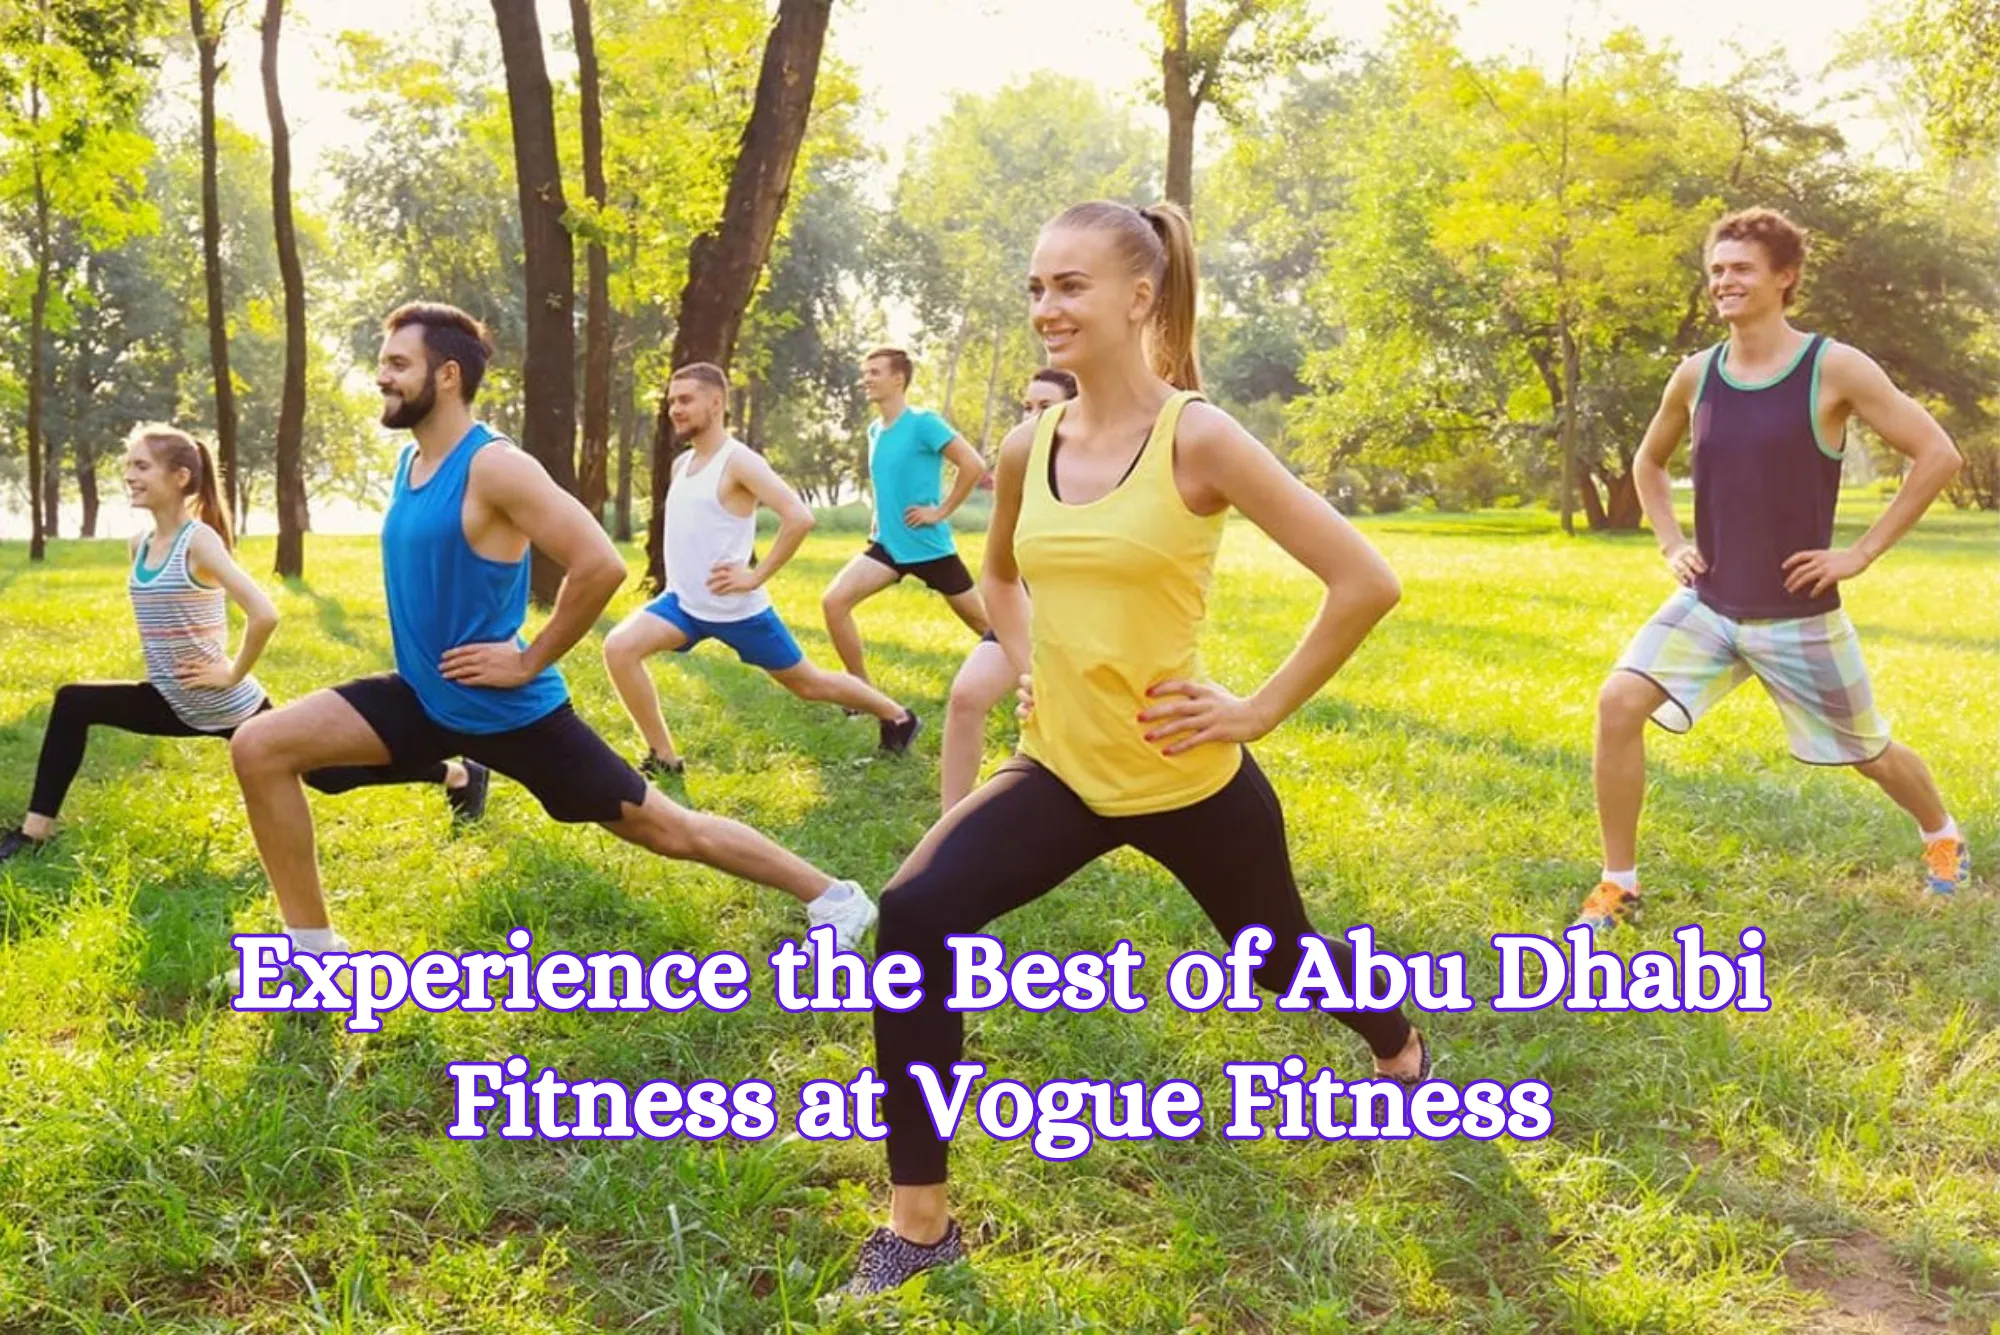 Experience the Best of Abu Dhabi Fitness at Vogue Fitness